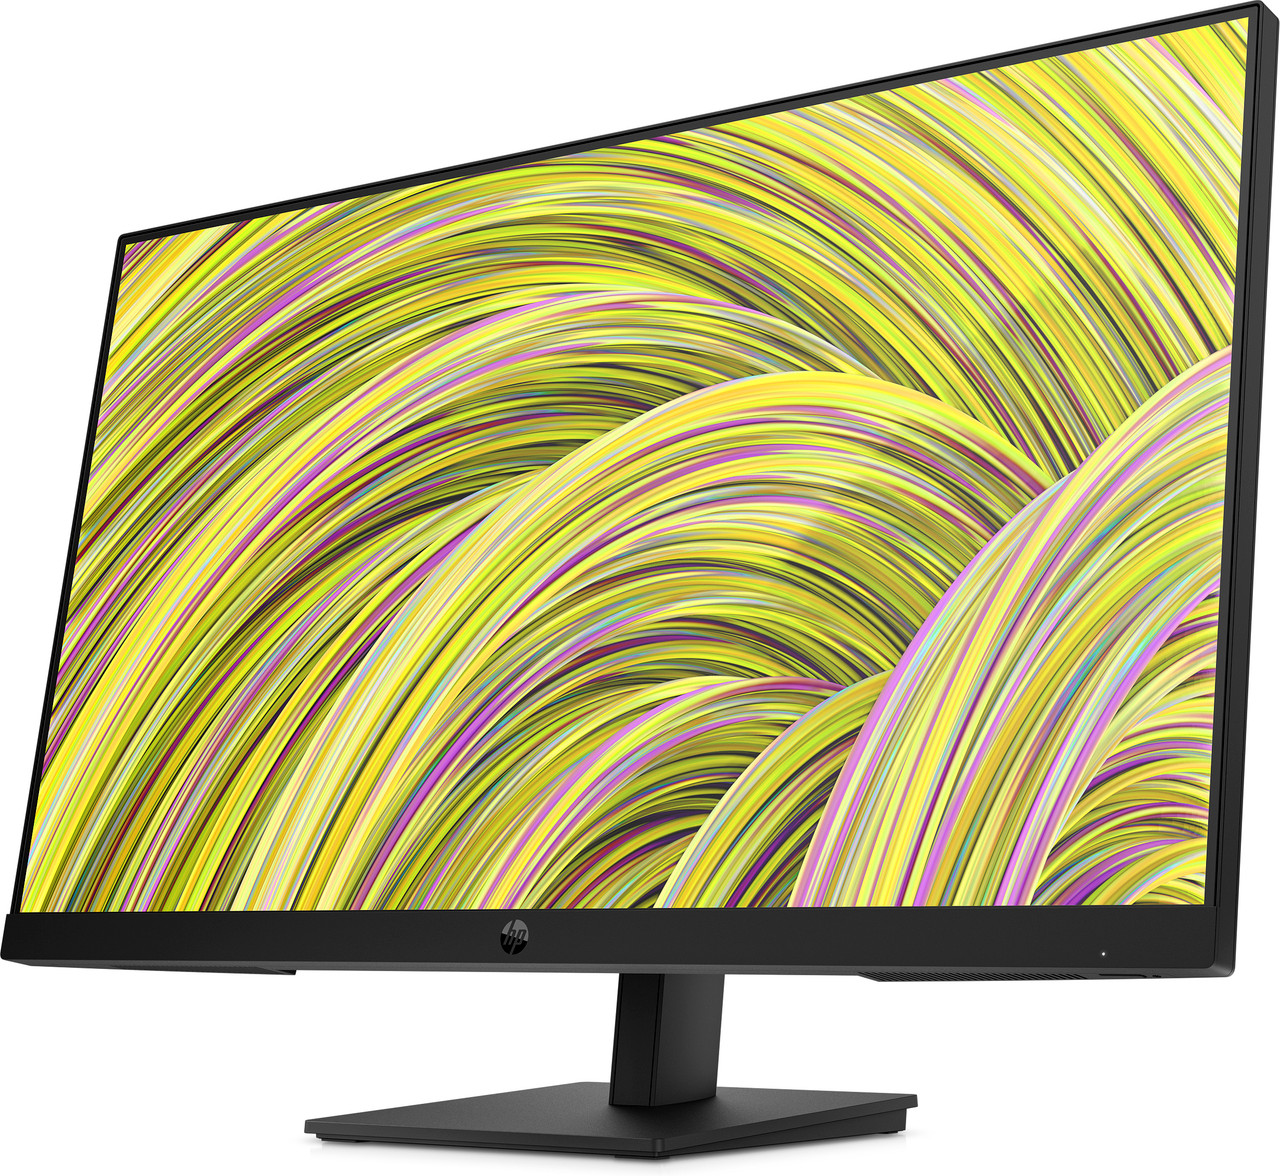 HP P27h G5 FHD Monitor​ FrontLeft